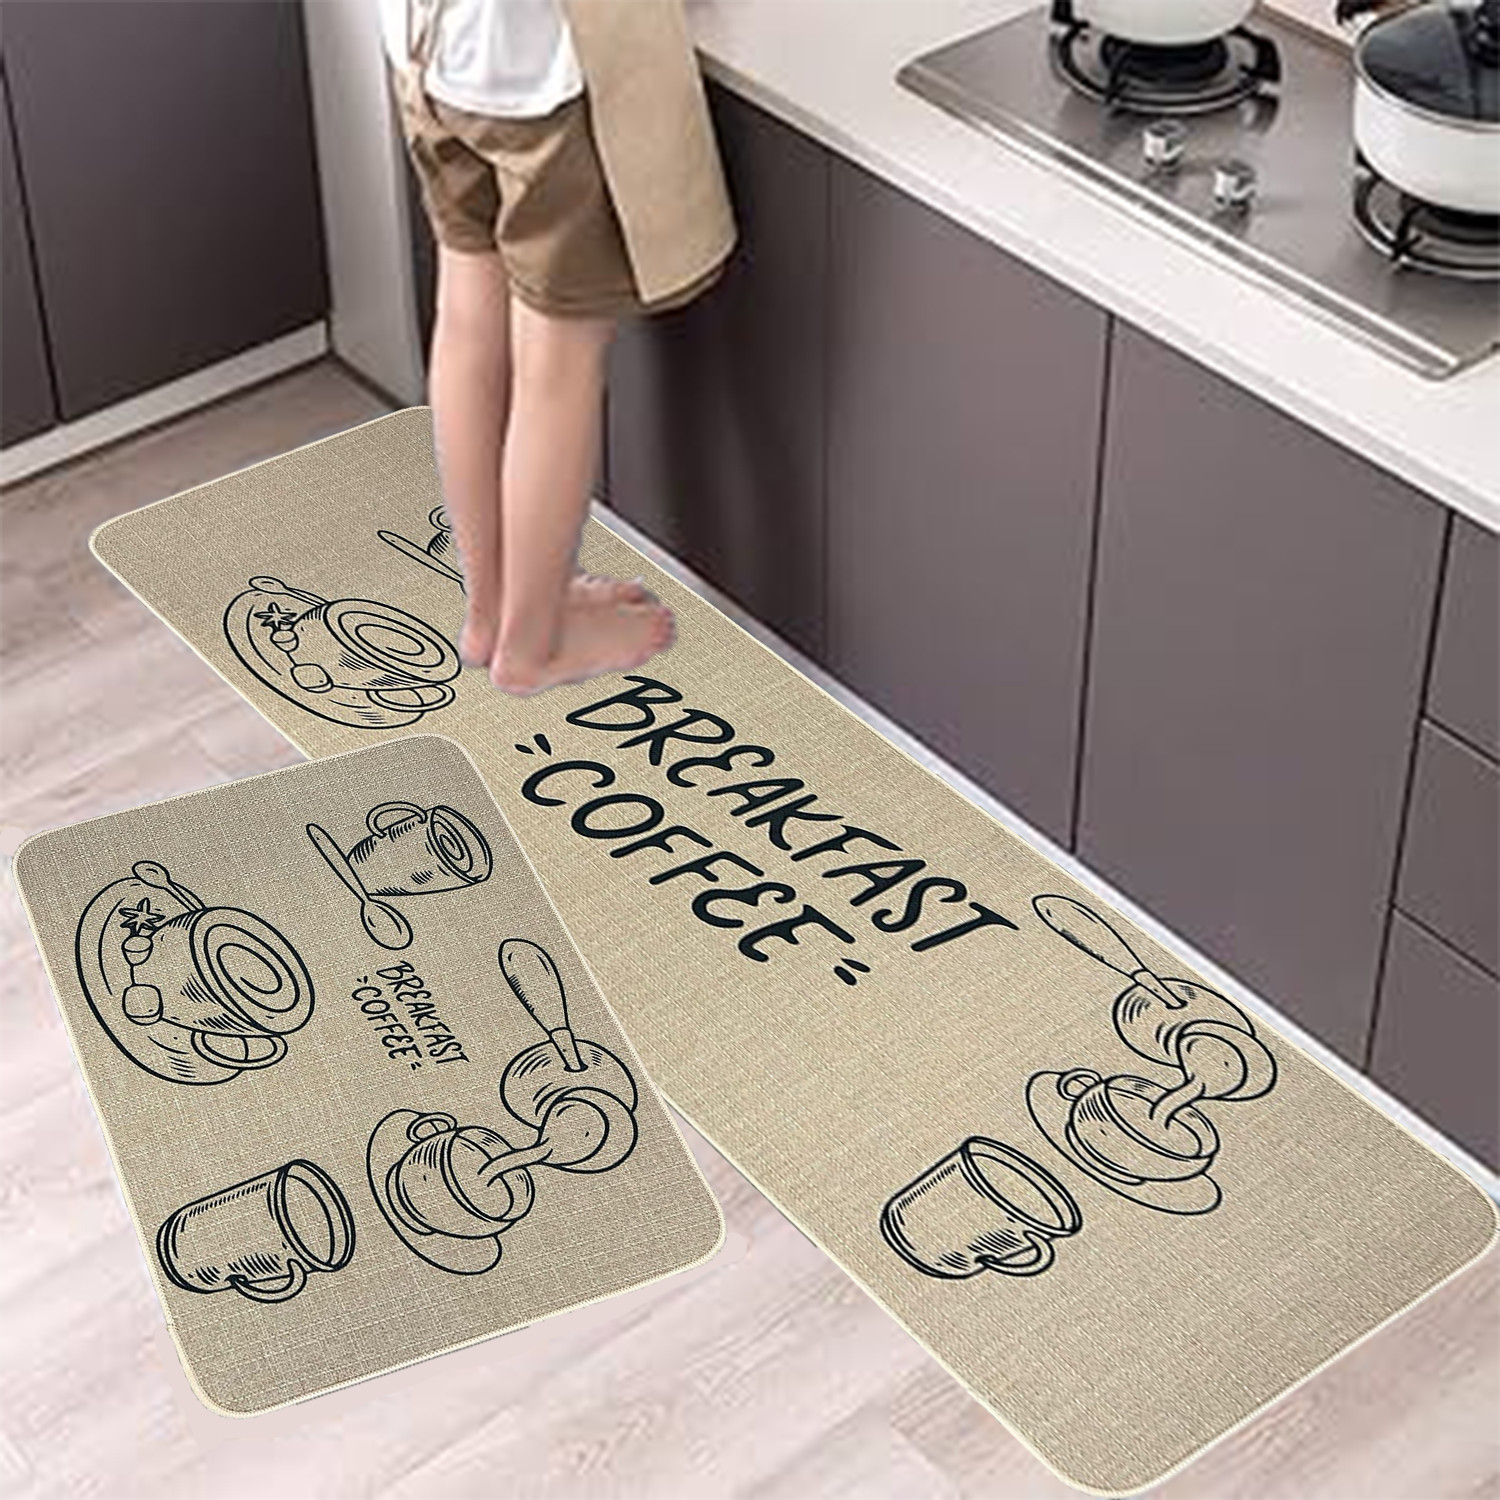 Kitchen Rugs Set, 2 Pieces Kitchenware Style Non Slip Kitchen Mat, Easy to Clean Comfort Standing Mats for Kitchen, Home, Office,Laundry,Living Room